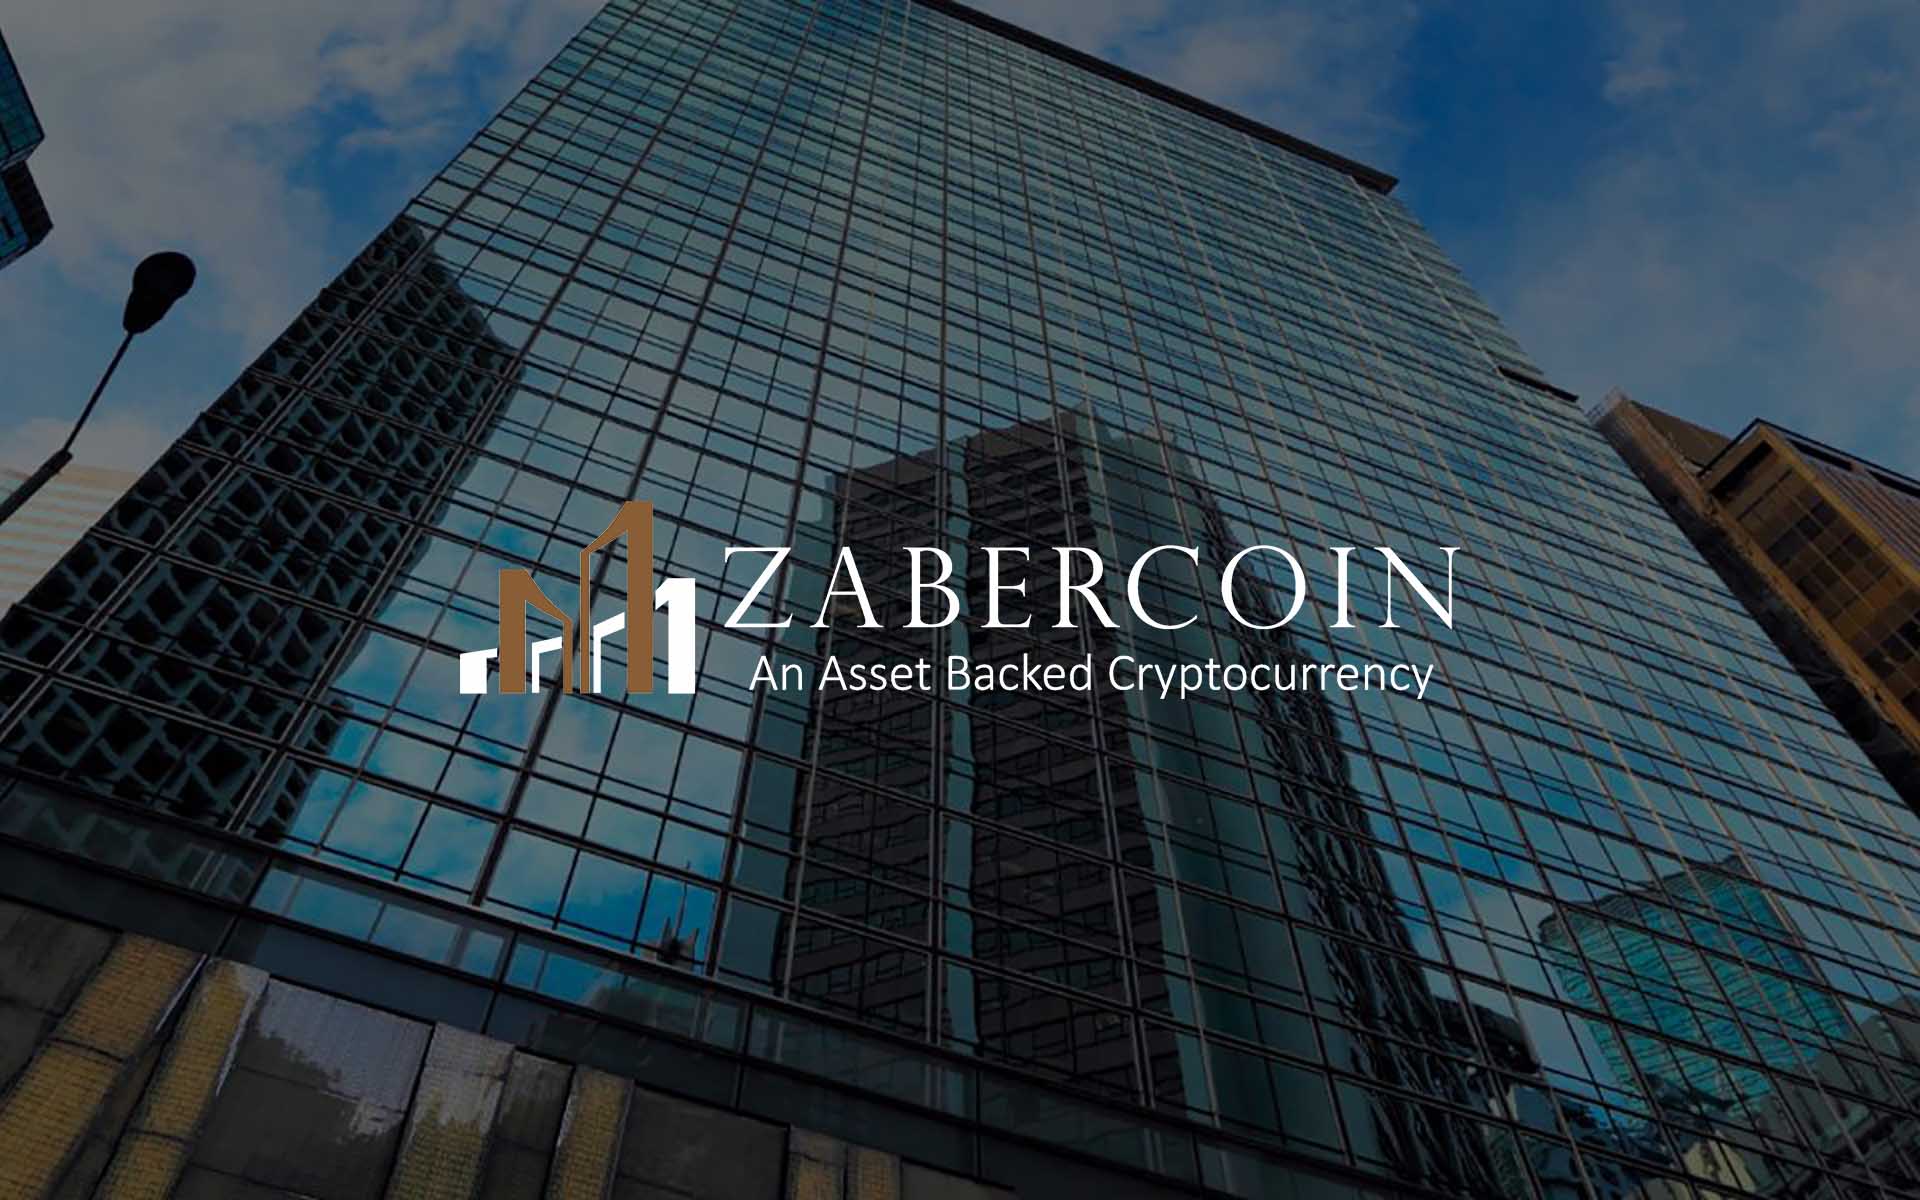 Zabercoin - an Asset Backed Cryptocurrency